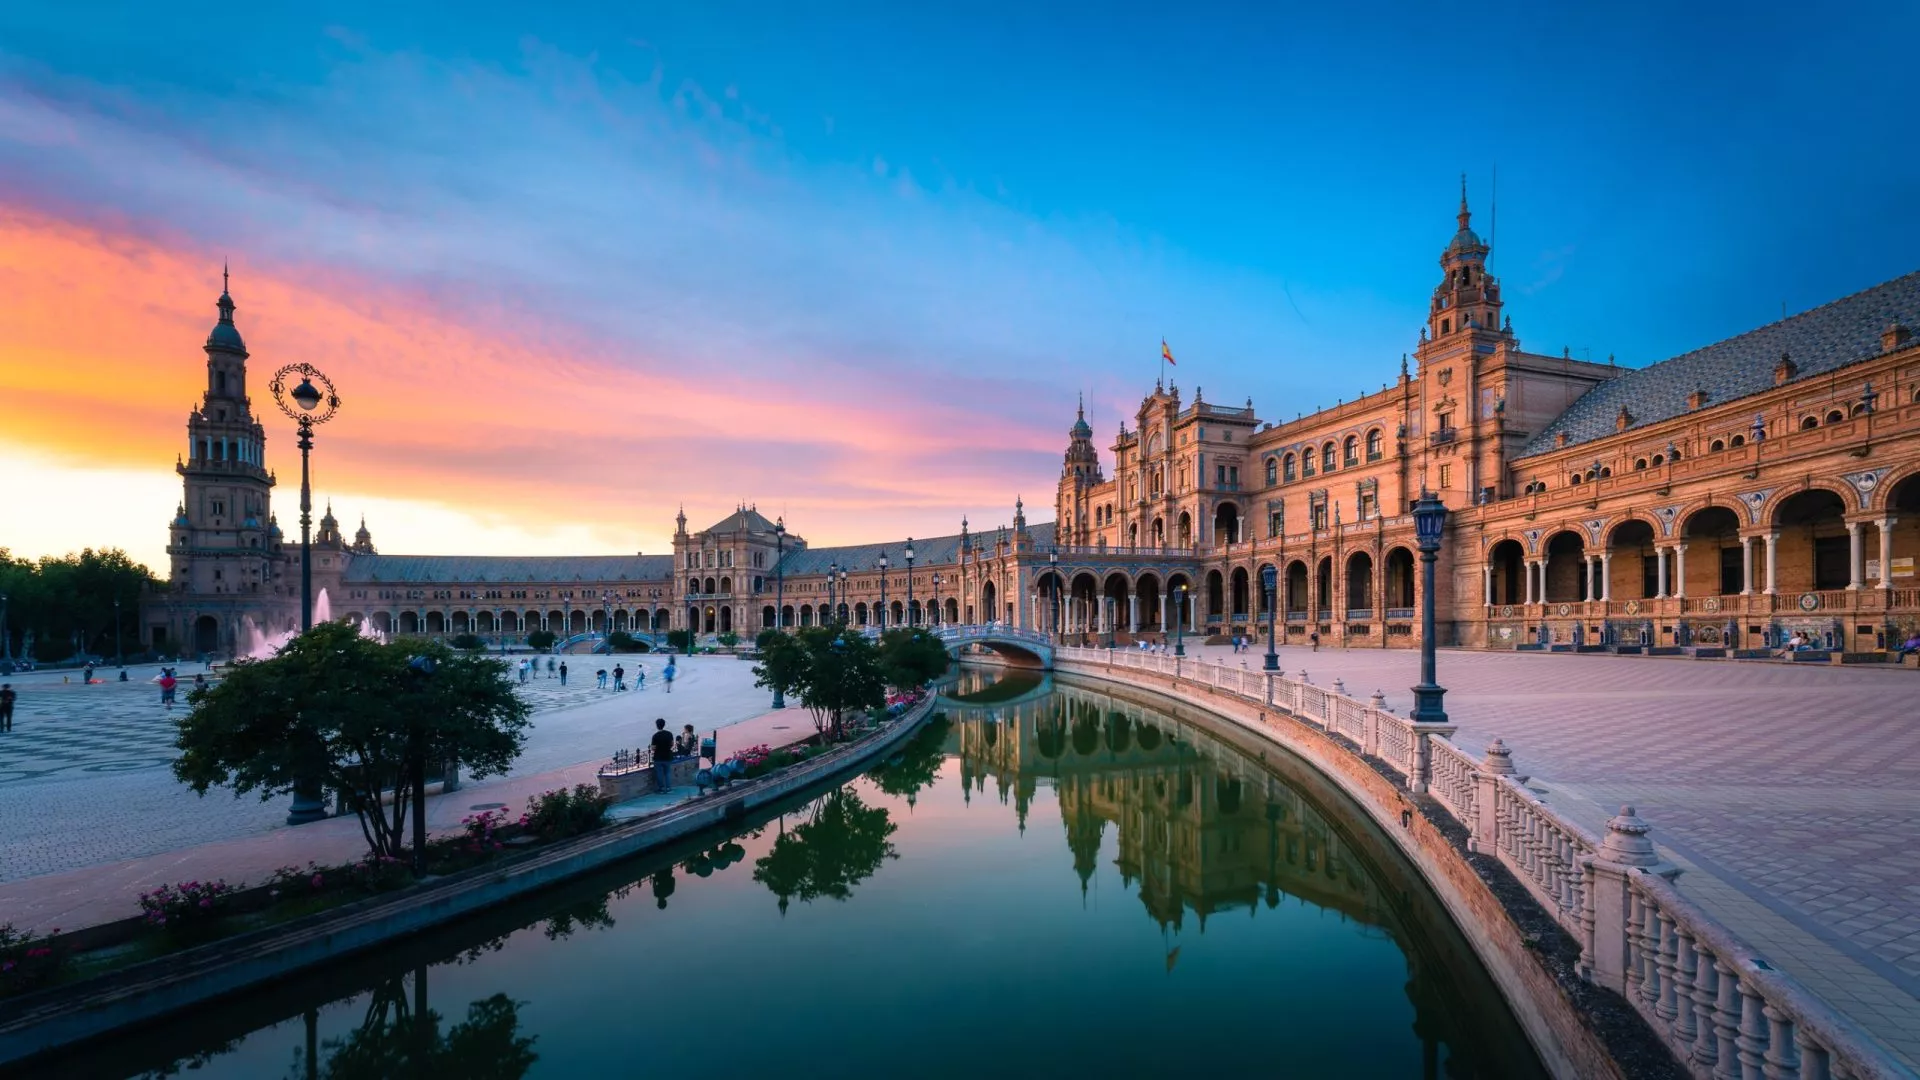 Plaza de España in Seville with Dramatic Colorful Clouds at Sunset, Andalusia, Spain